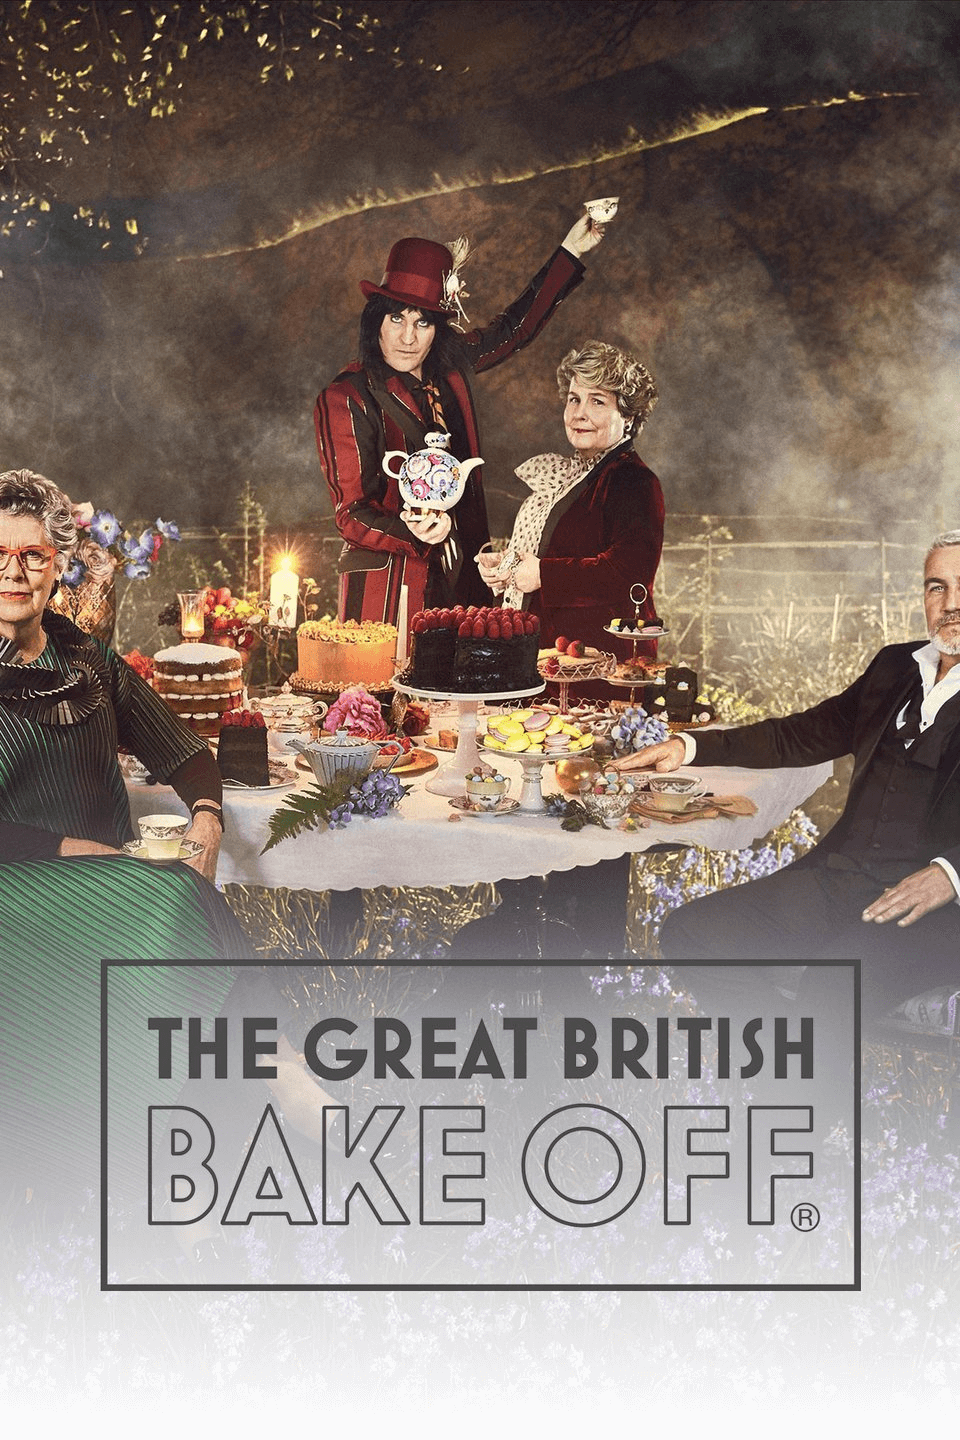 The Great British Bake Off (2010)&lt;strong&gt;#211&lt;/strong&gt;